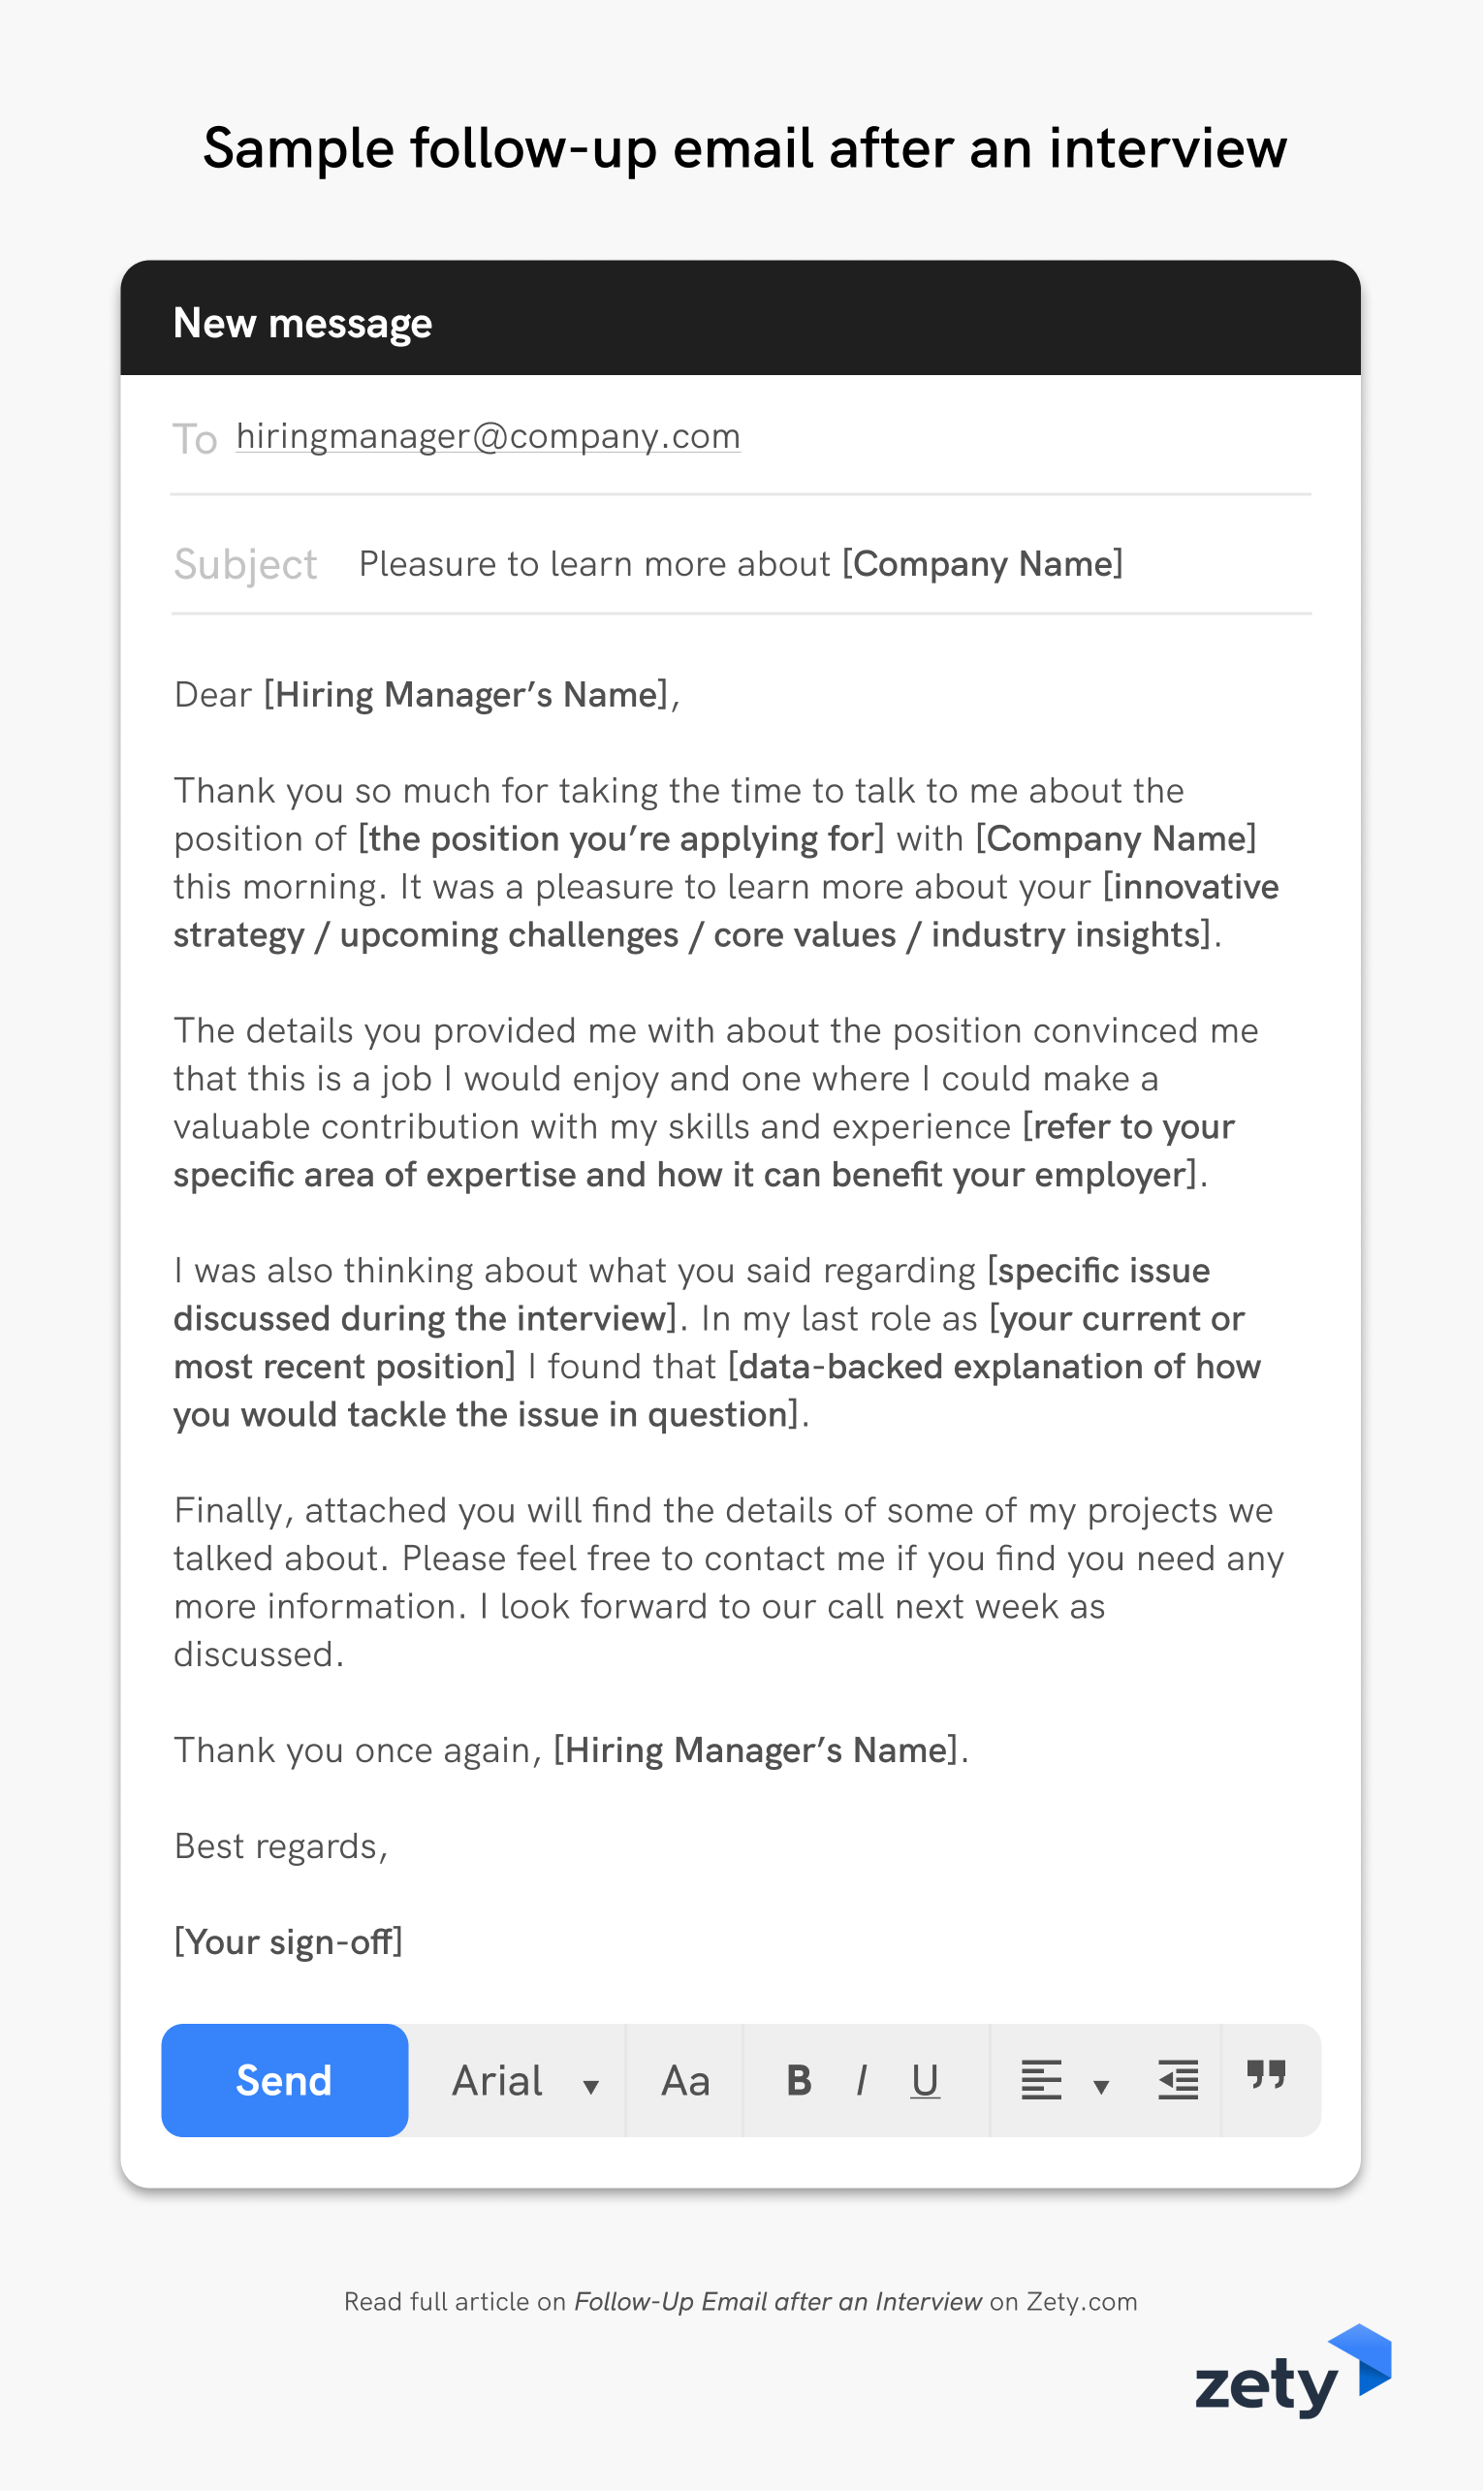 Sample follow-up email after an interview